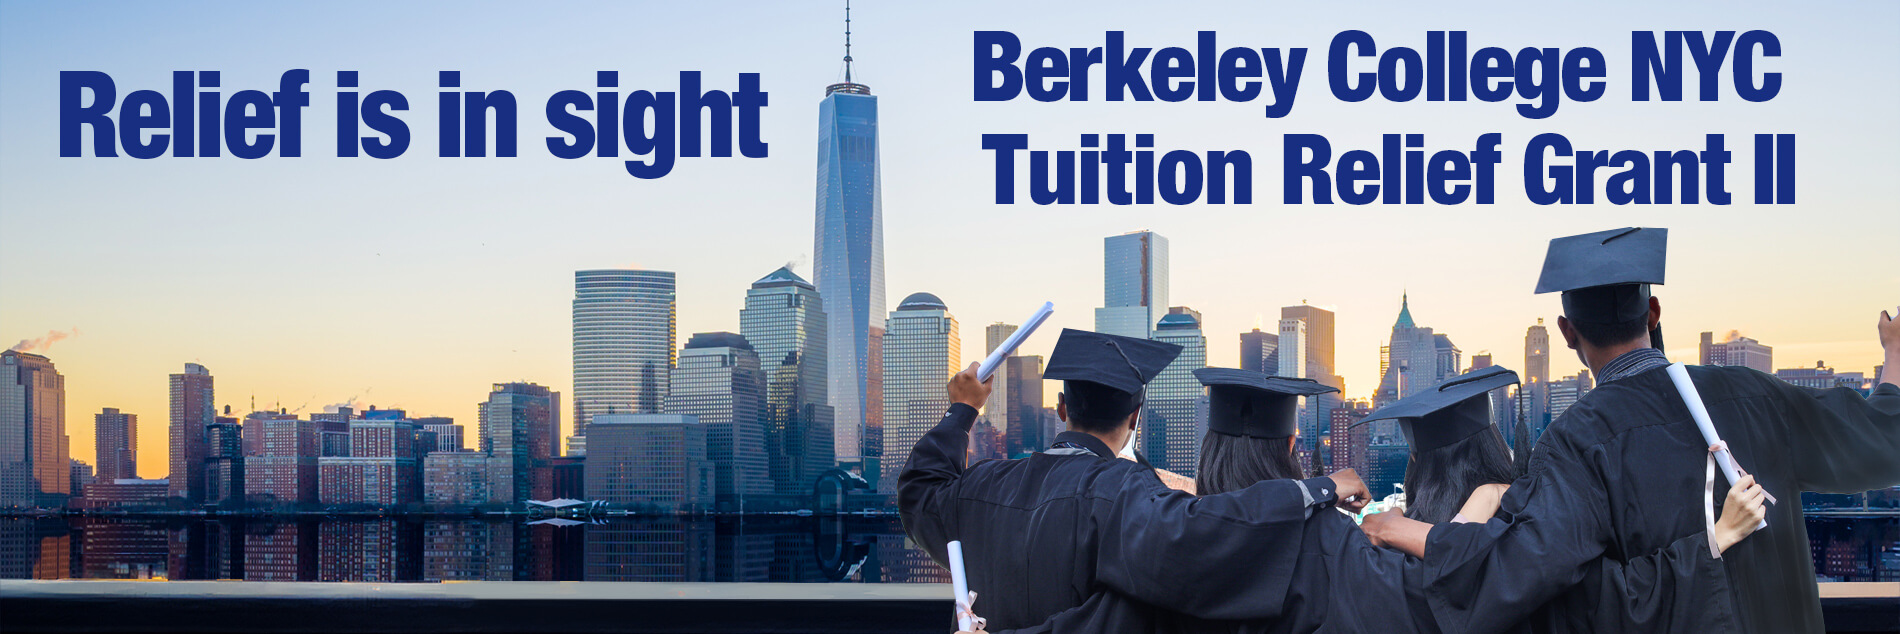 Relief is Insight. Berkeley College New York Tuition Relief Grant II. Image of Graduates against city skyline backdrop